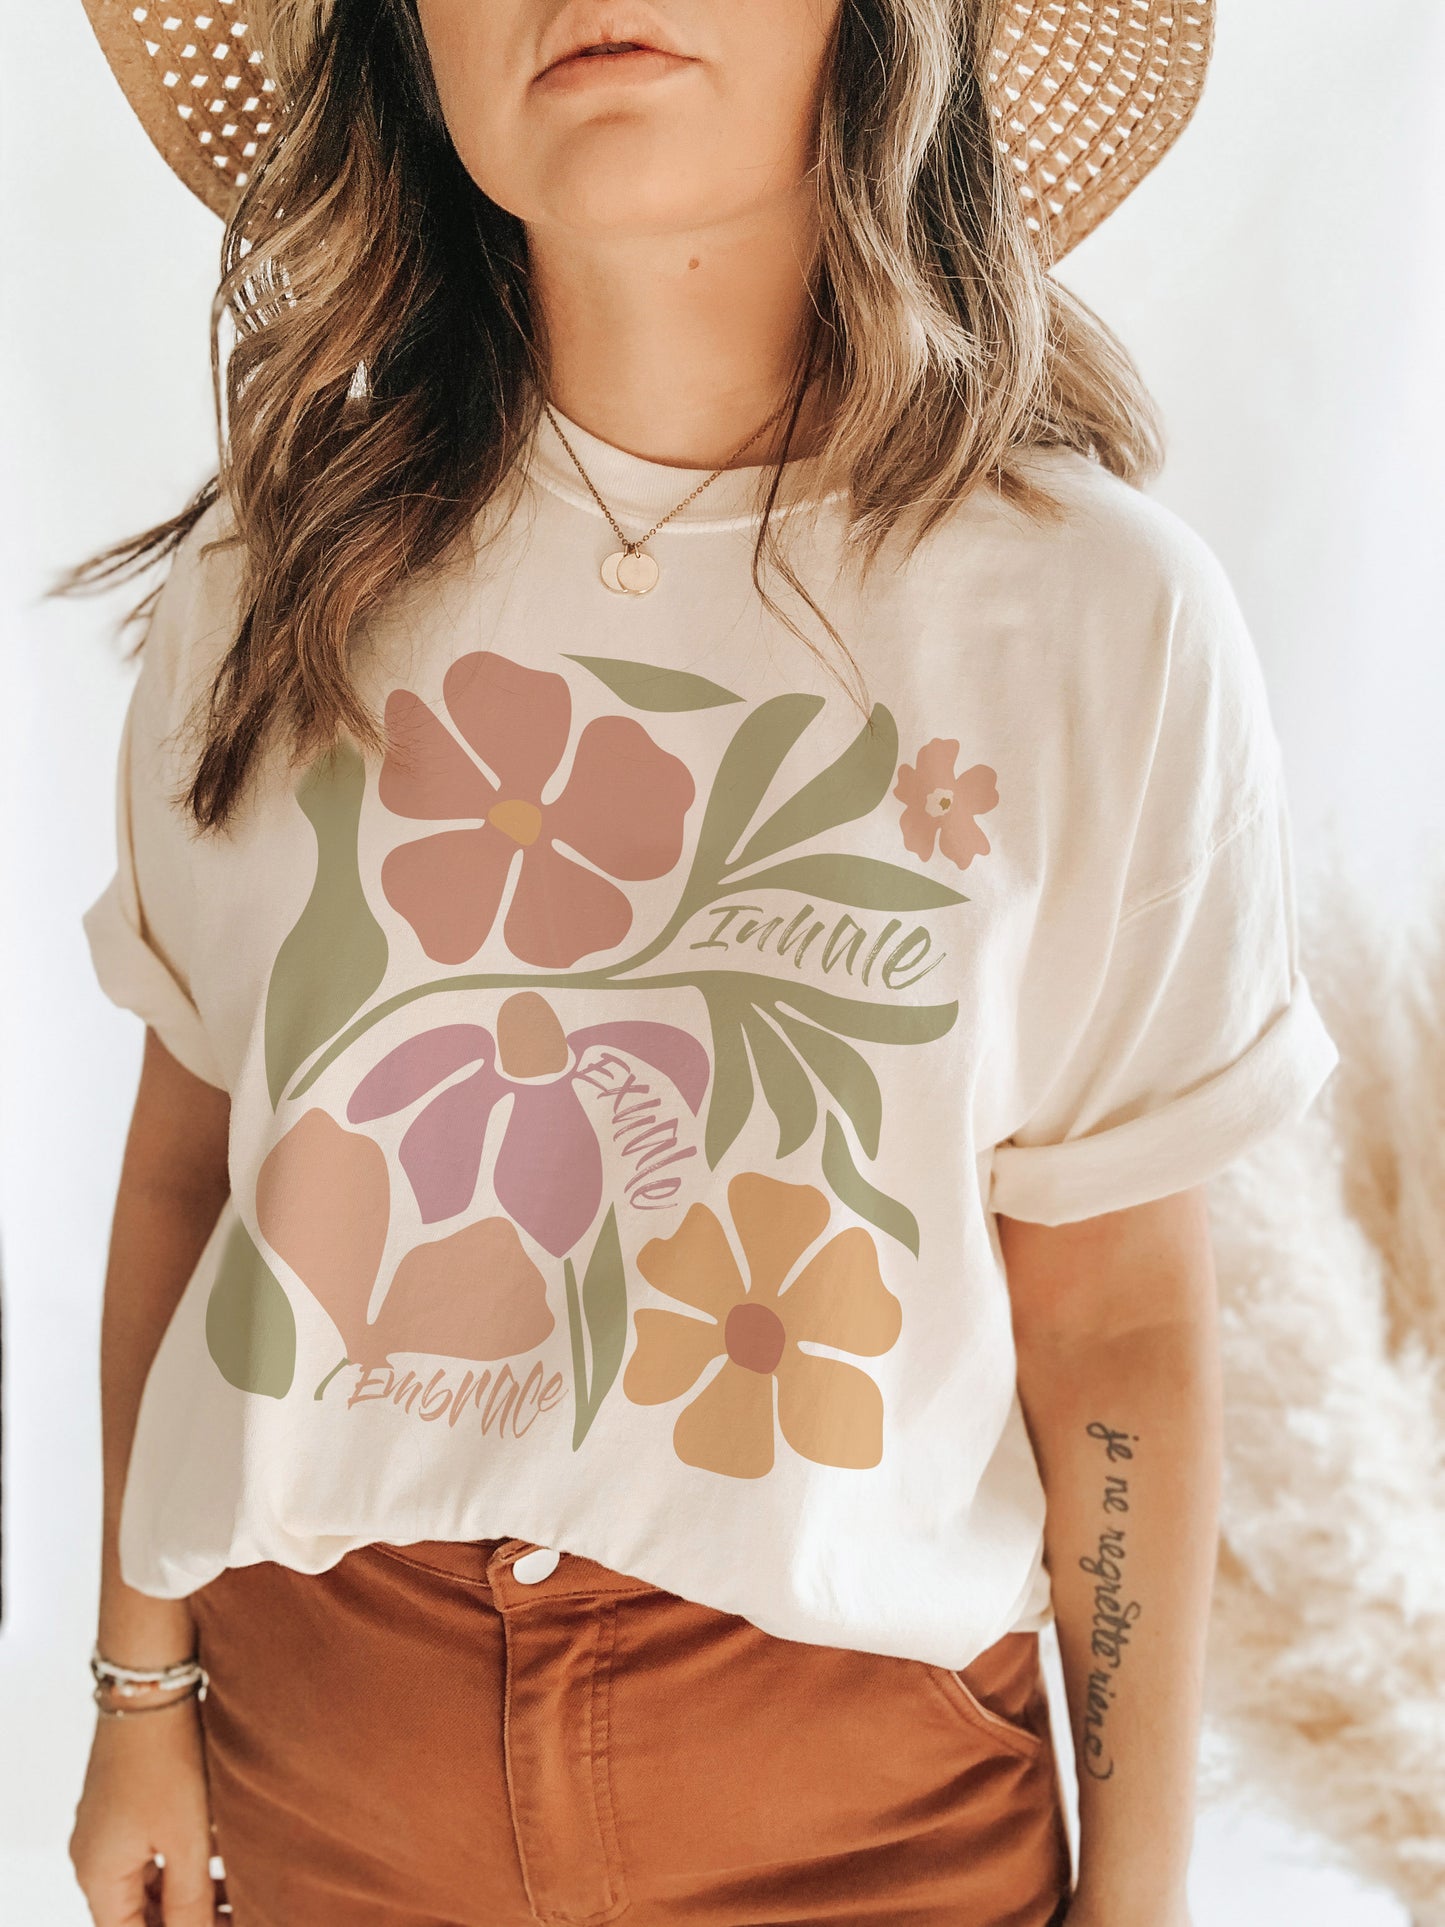 Inhale, Exhale, Embrace Flower Tee - Unisex & Youth